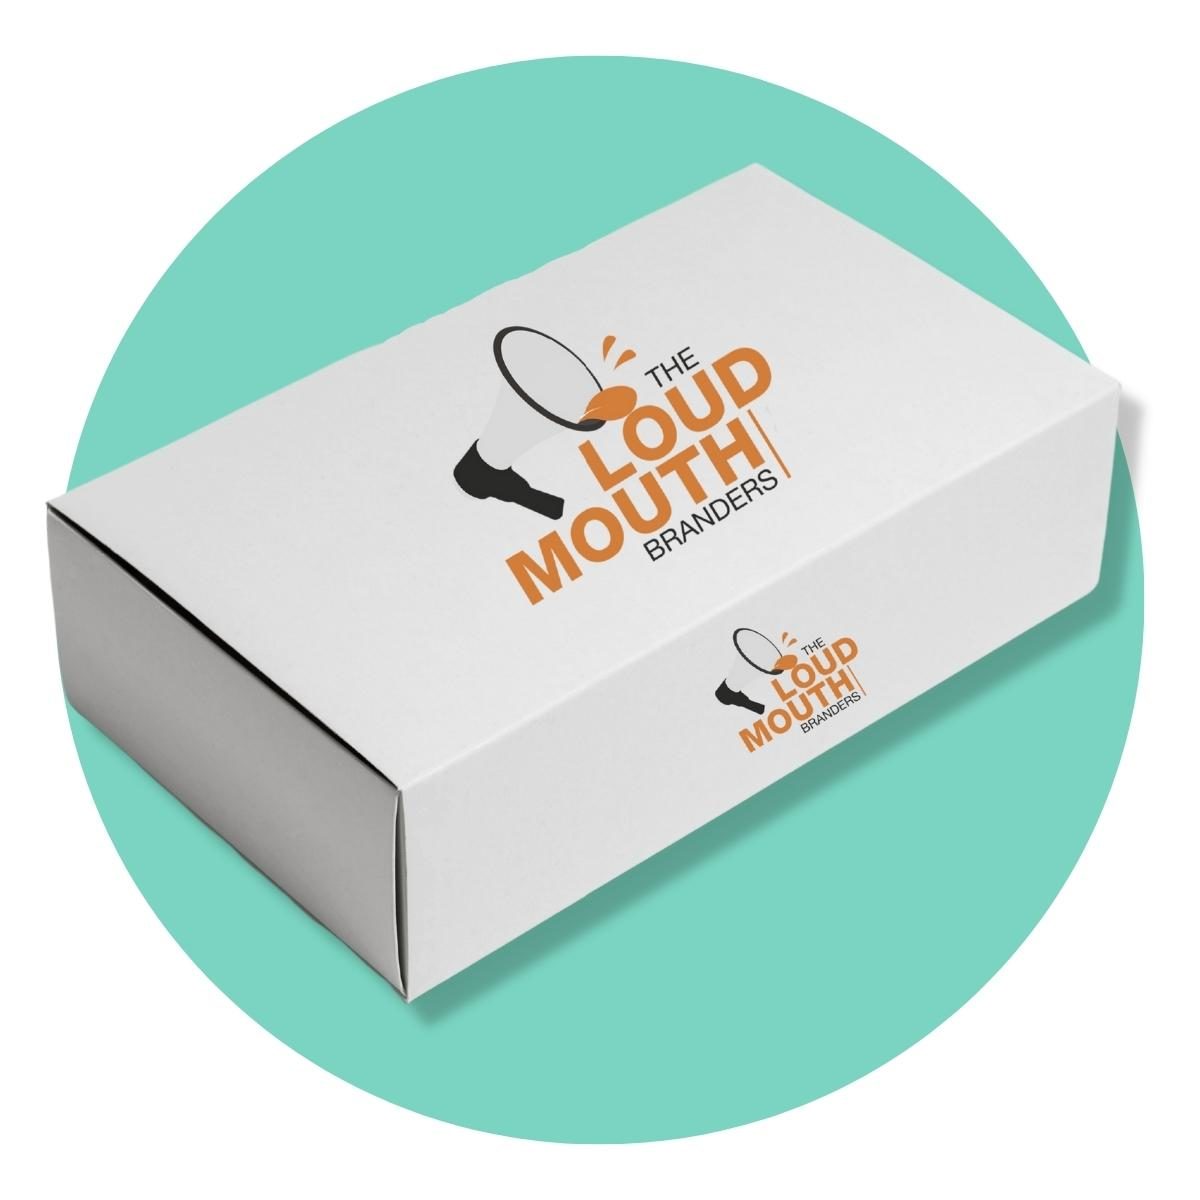 branded carboard box with custom business logo